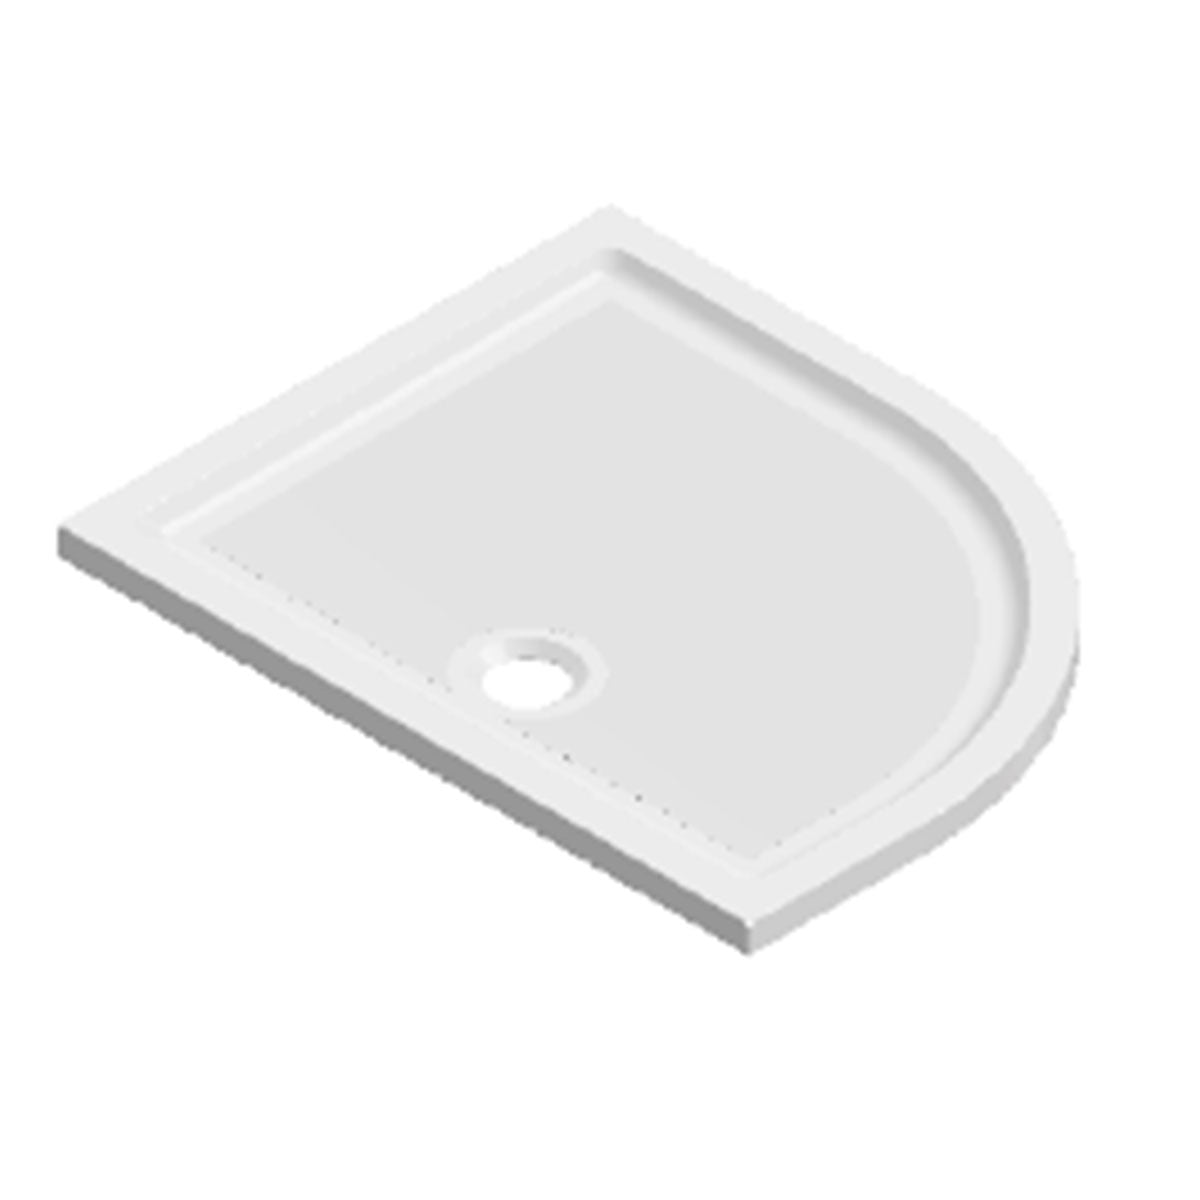 iTray Slip Resistant Low Profile Shower Tray - Offset Quadrant